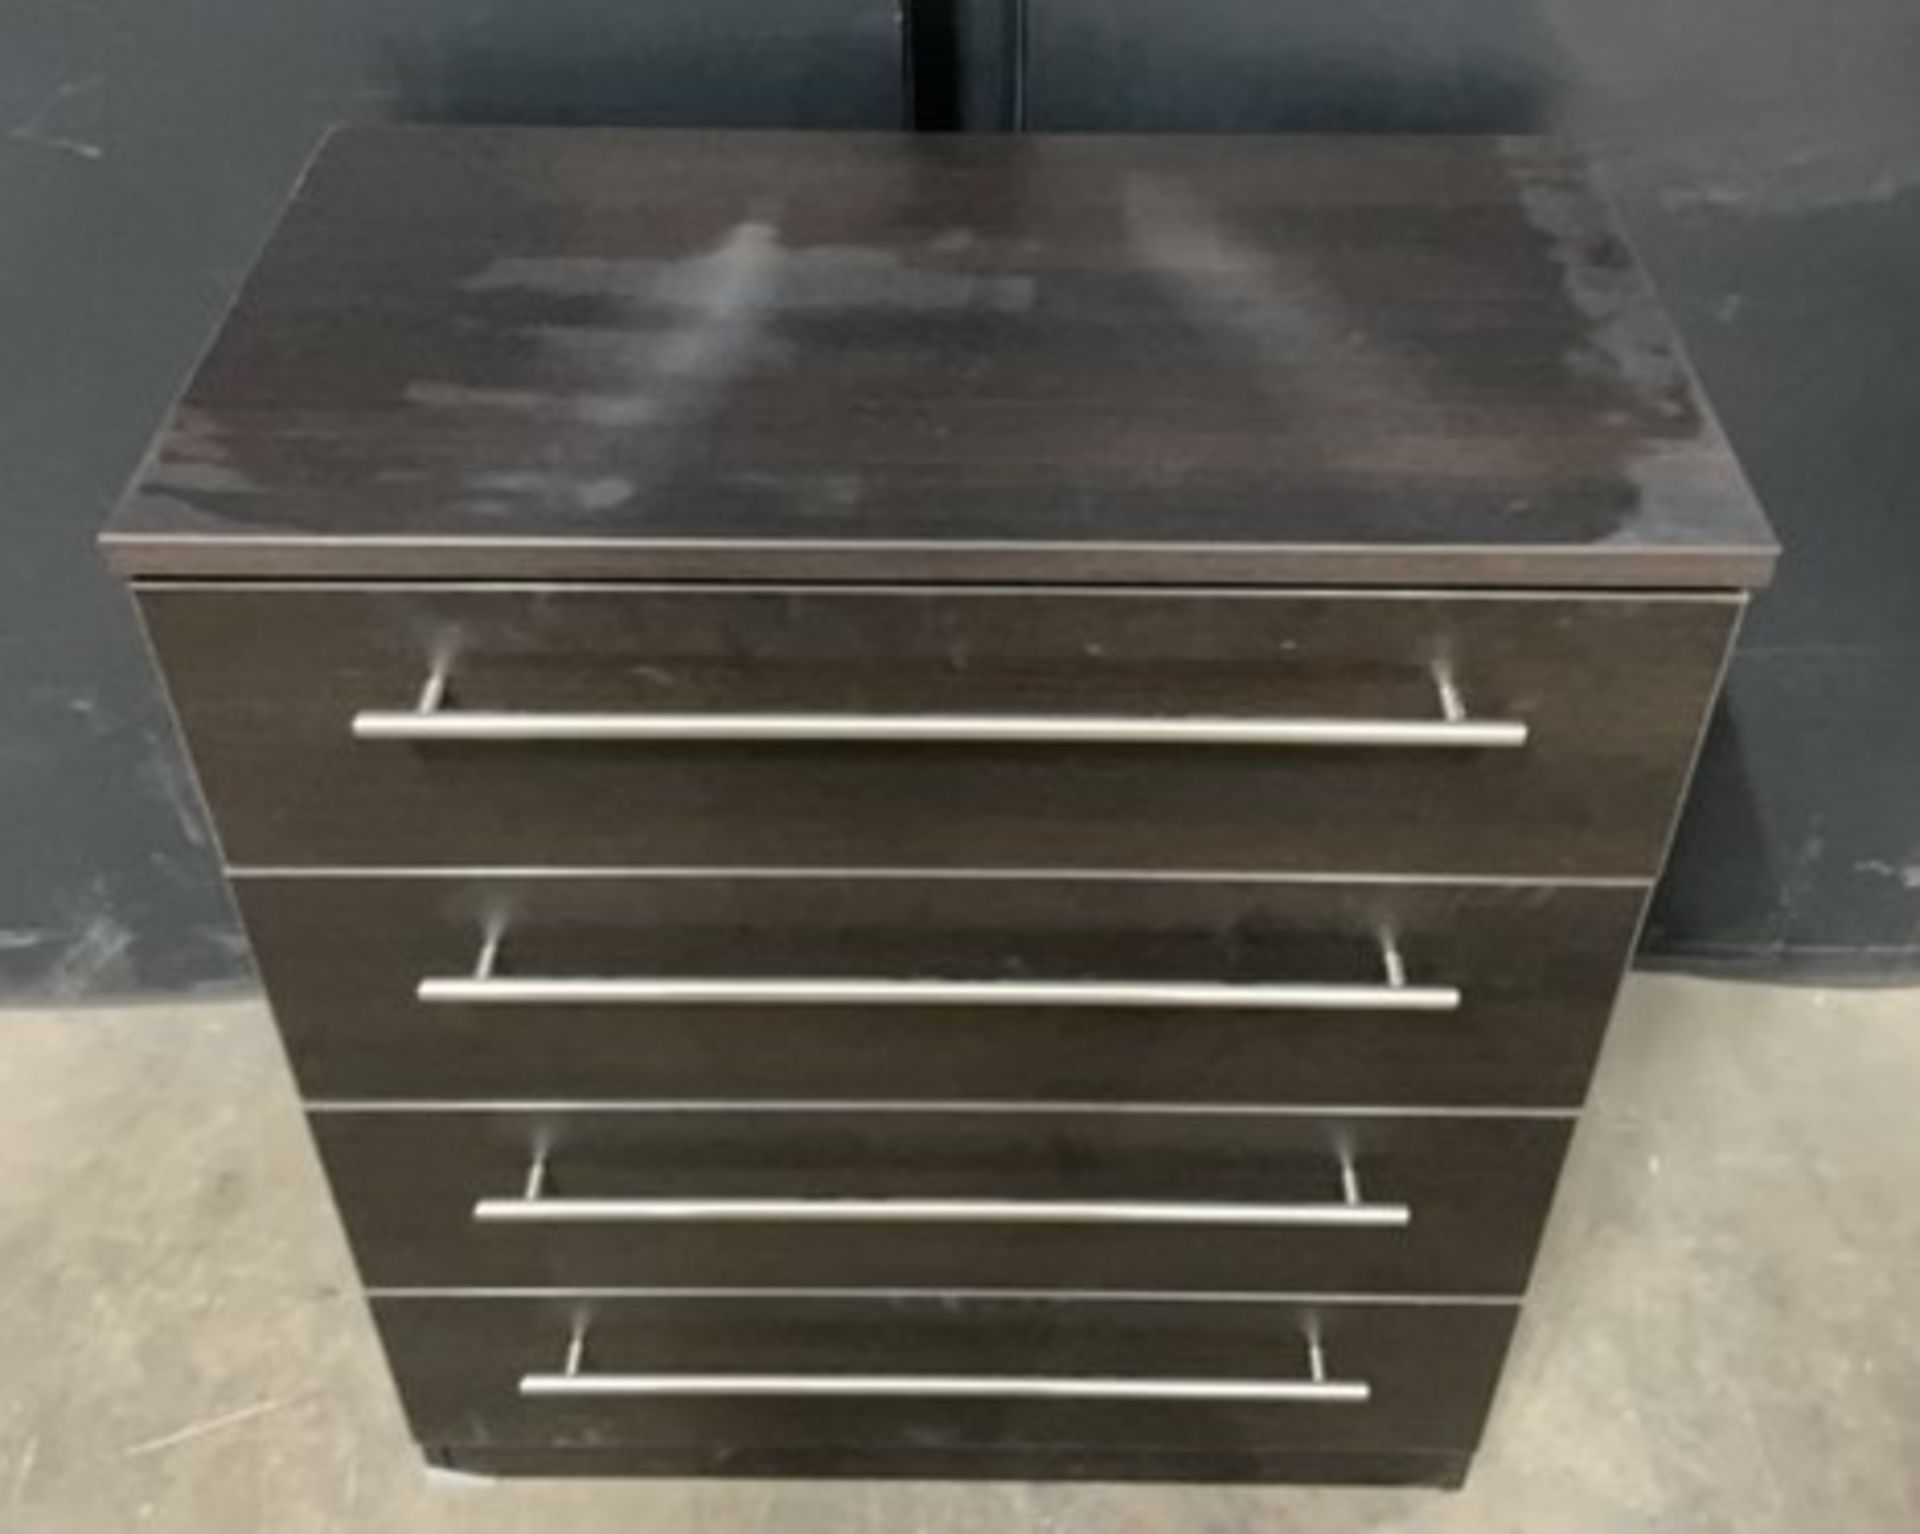 8 Drawer Chest of Drawers | Size: 88cm x 39cm x 64cm - Image 2 of 3